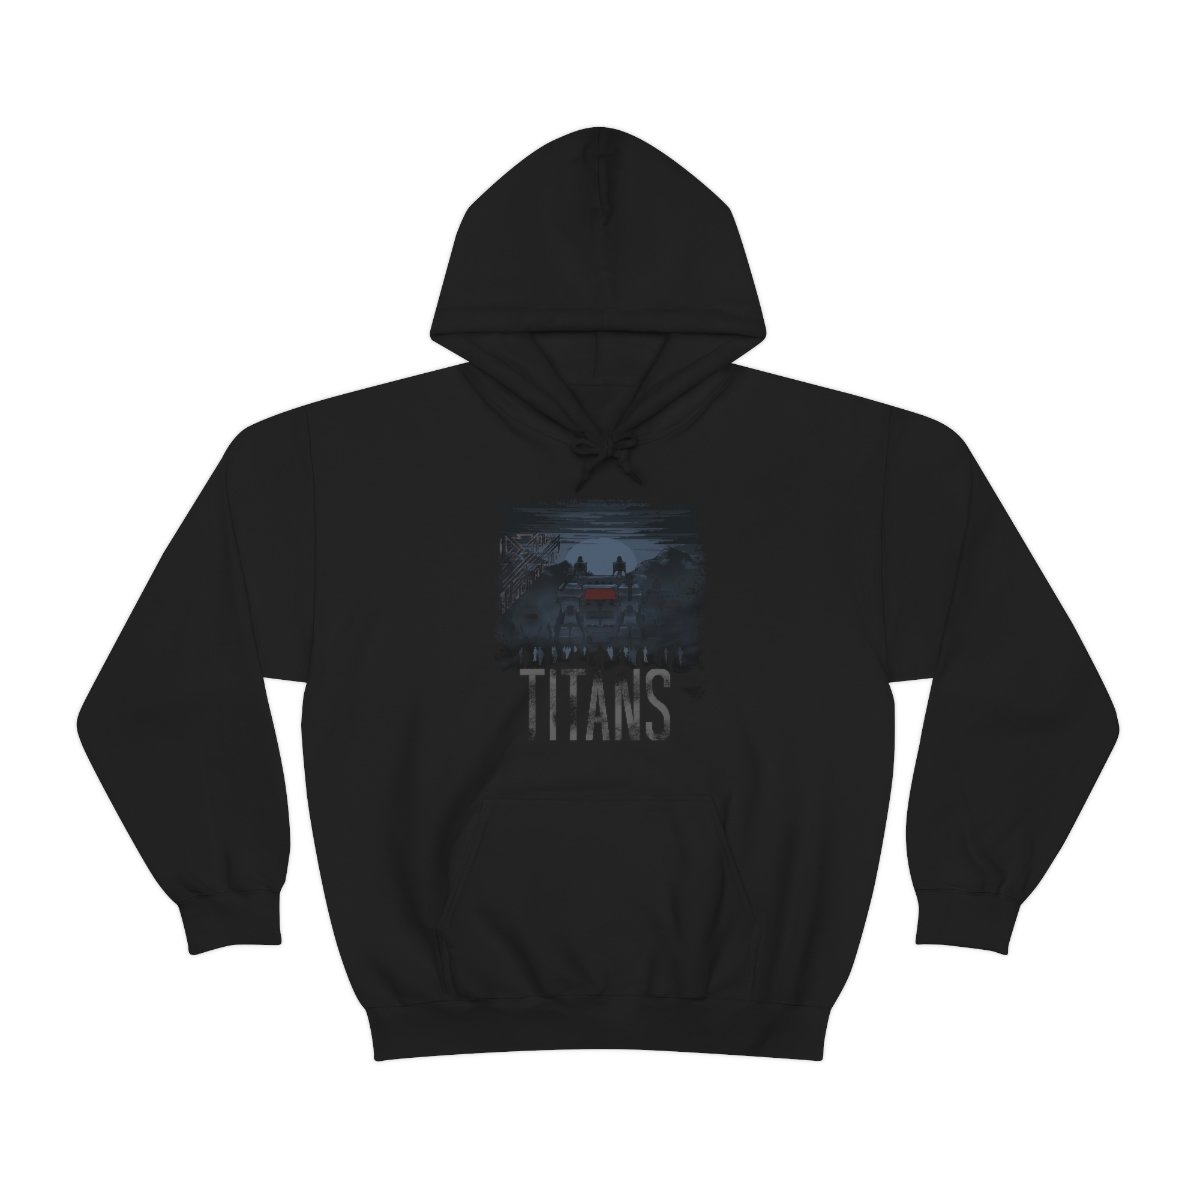 I Am The Pendragon – Titans Pullover Hooded Sweatshirt